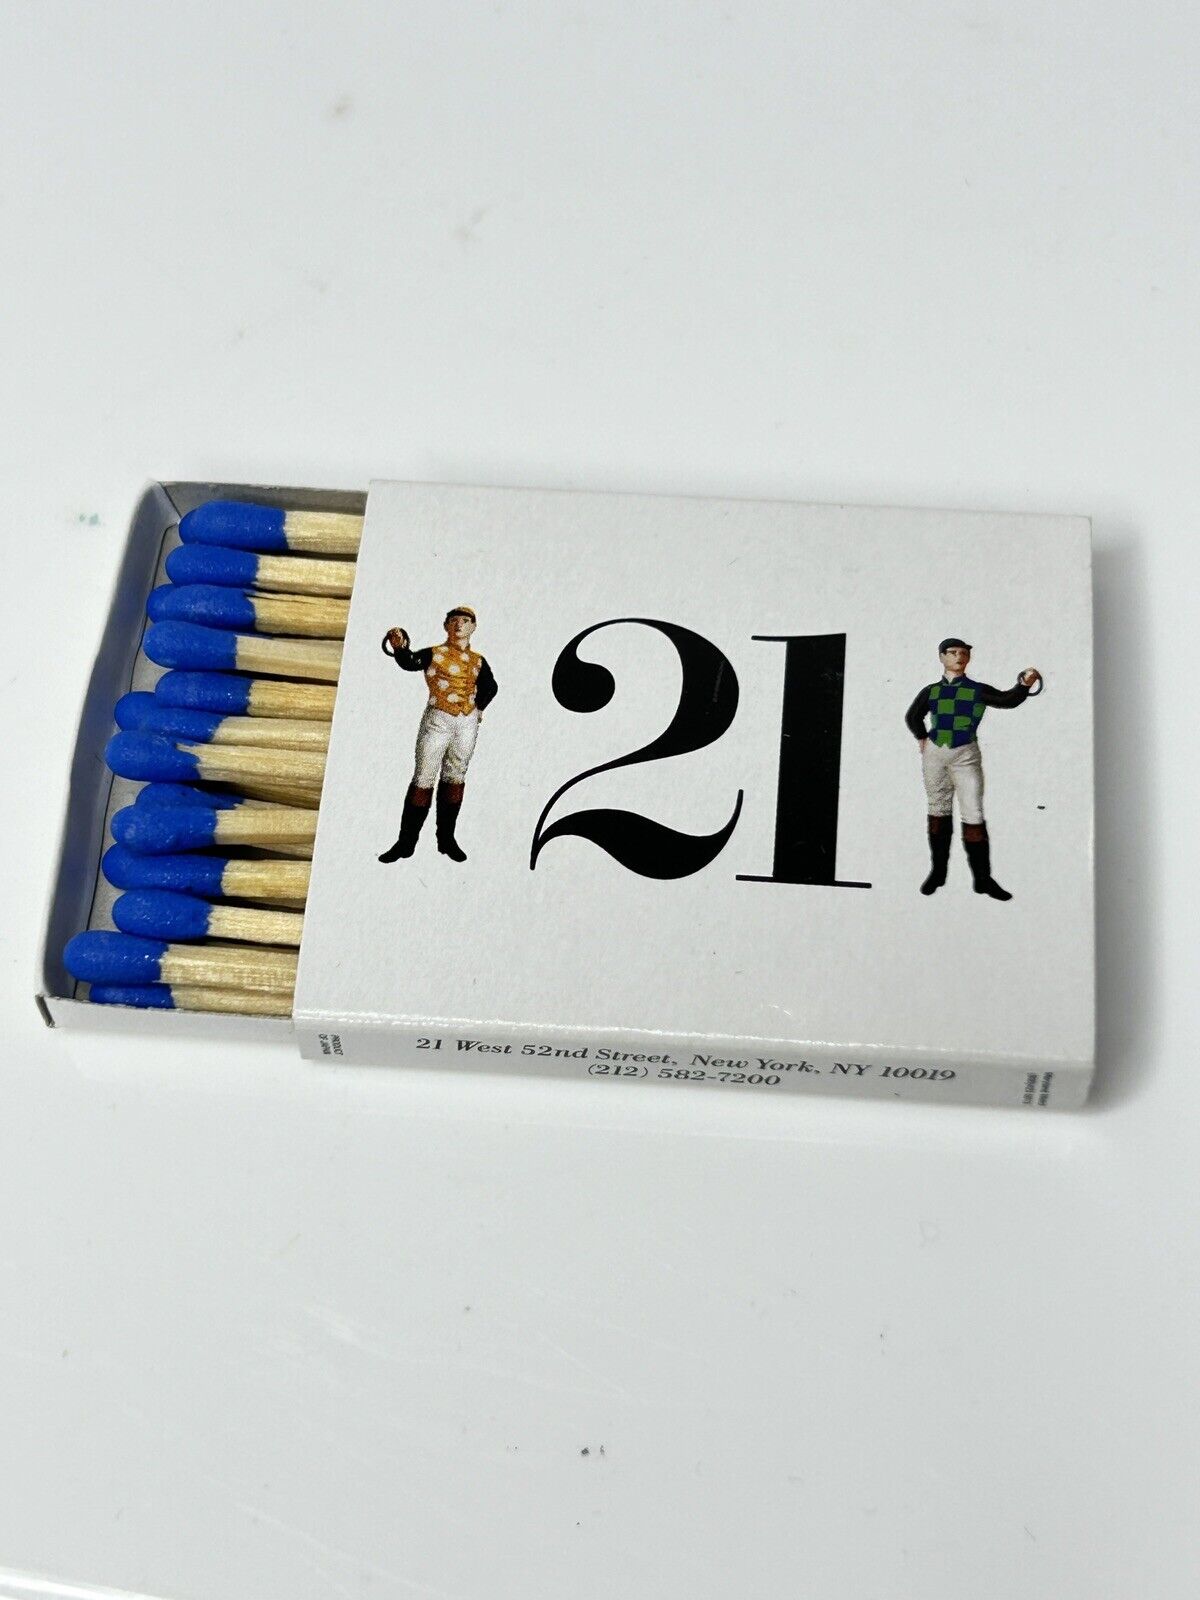 THE 21 CLUB  RESTAURANT NYC  Matchbox With Wooden Blue Matches Full Unstruck